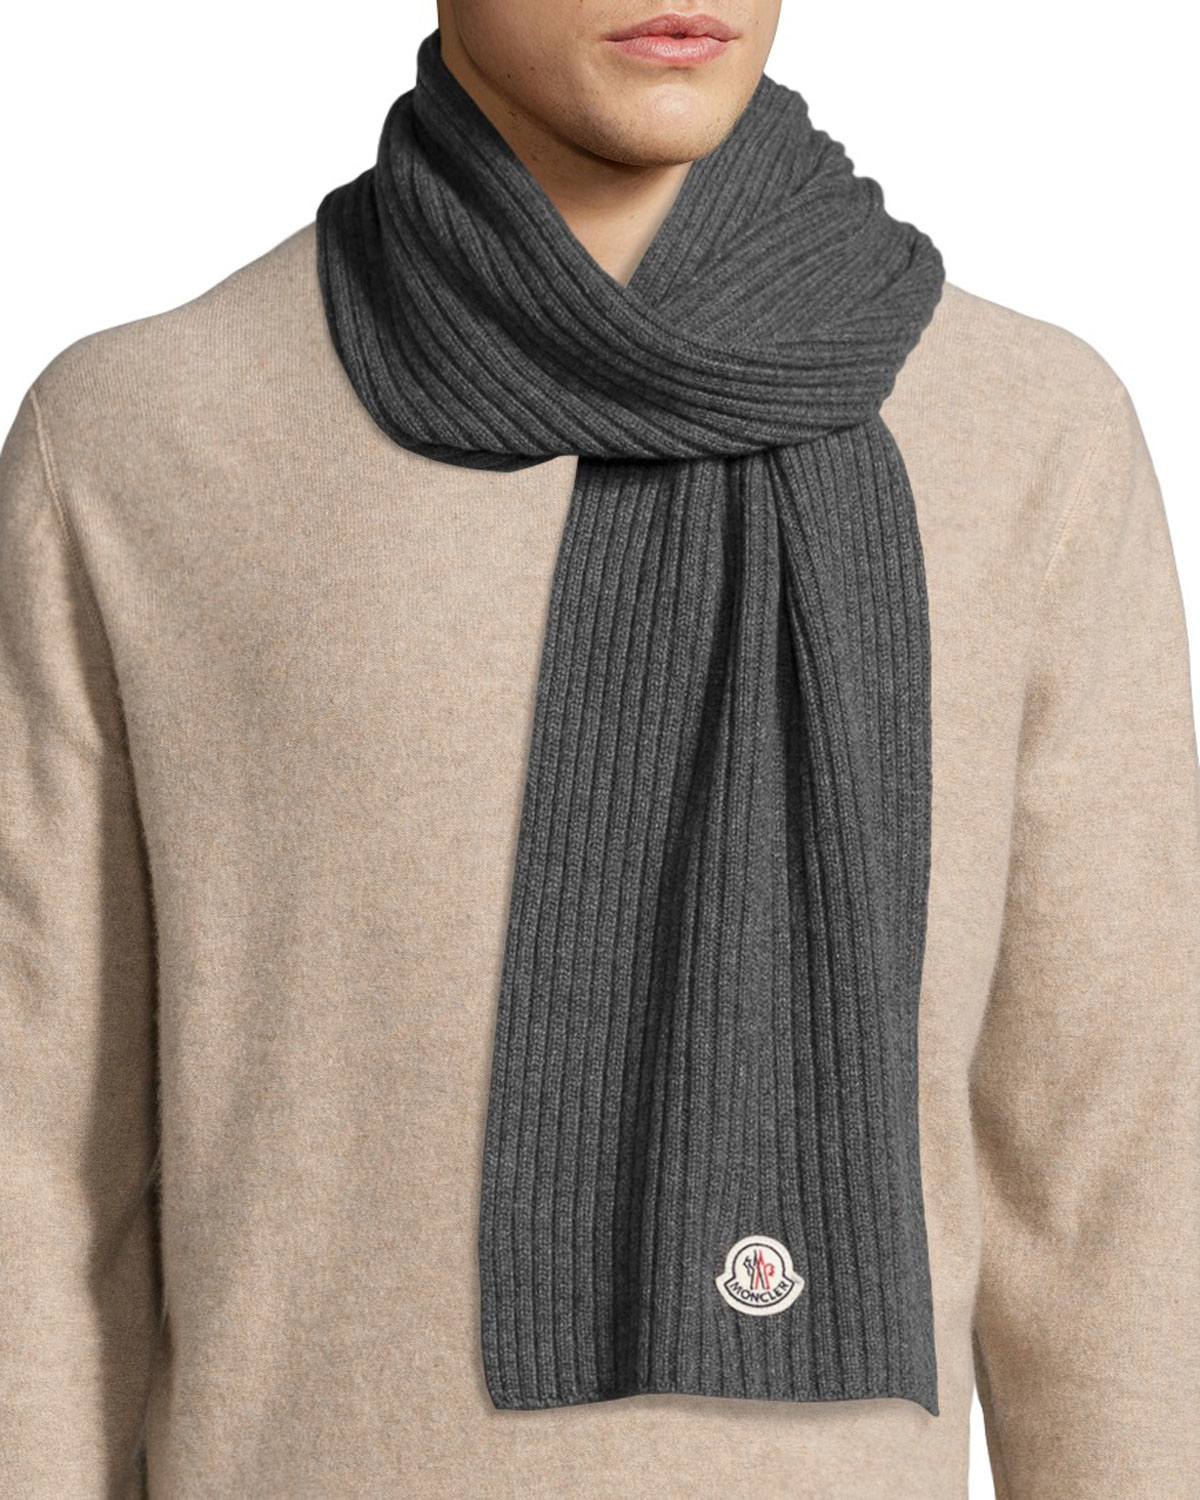 Moncler Men's Cashmere Ribbed Scarf in Gray for Men - Lyst